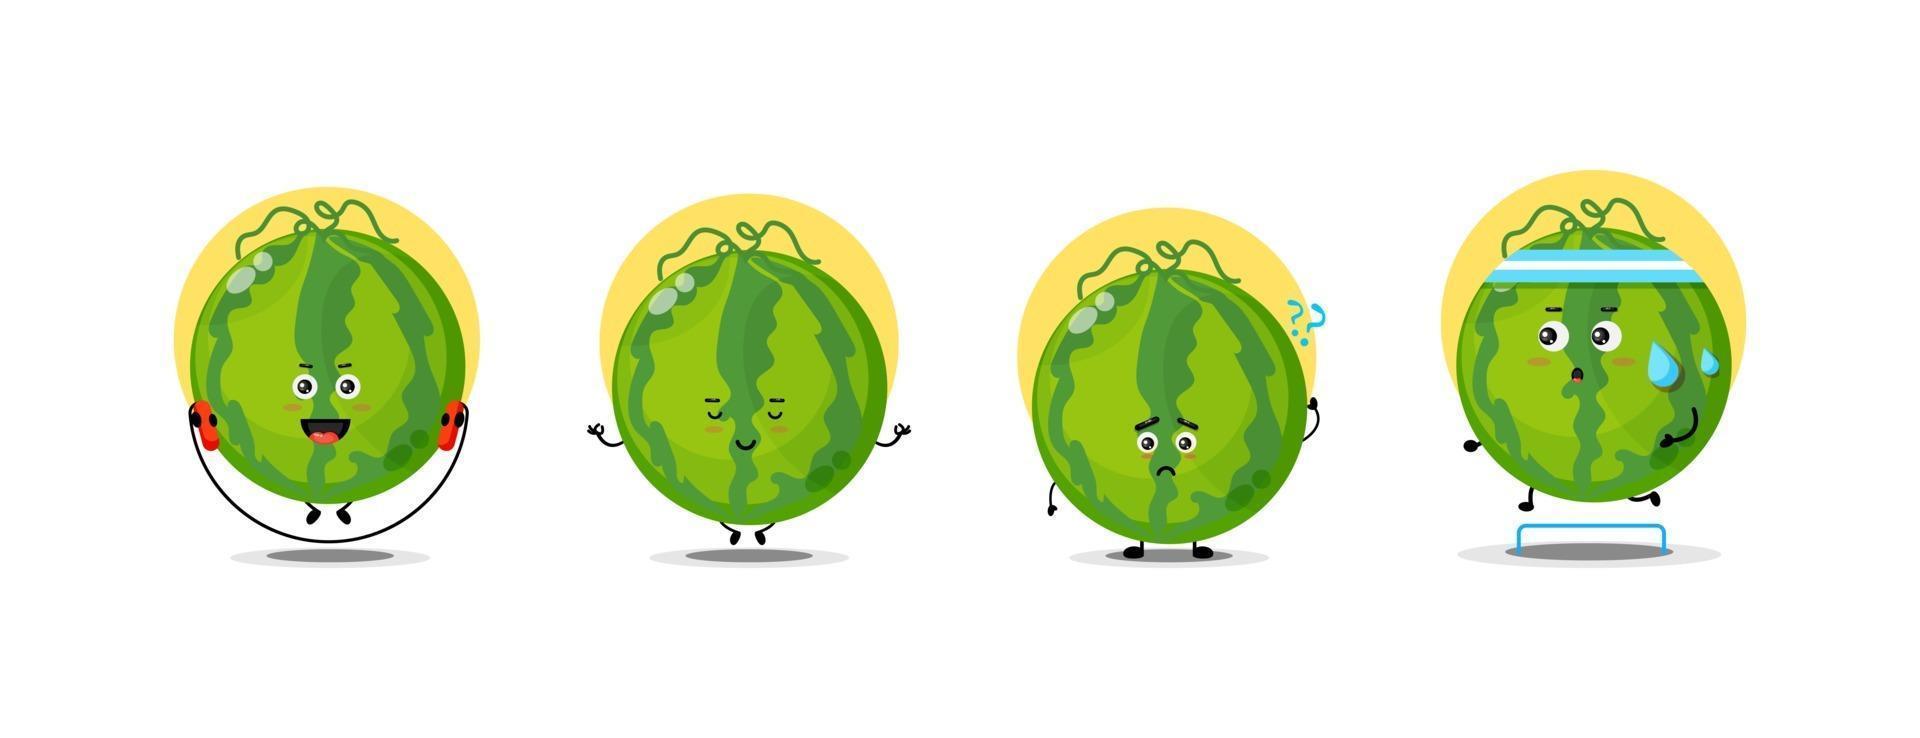 Cute watermelon character collection vector